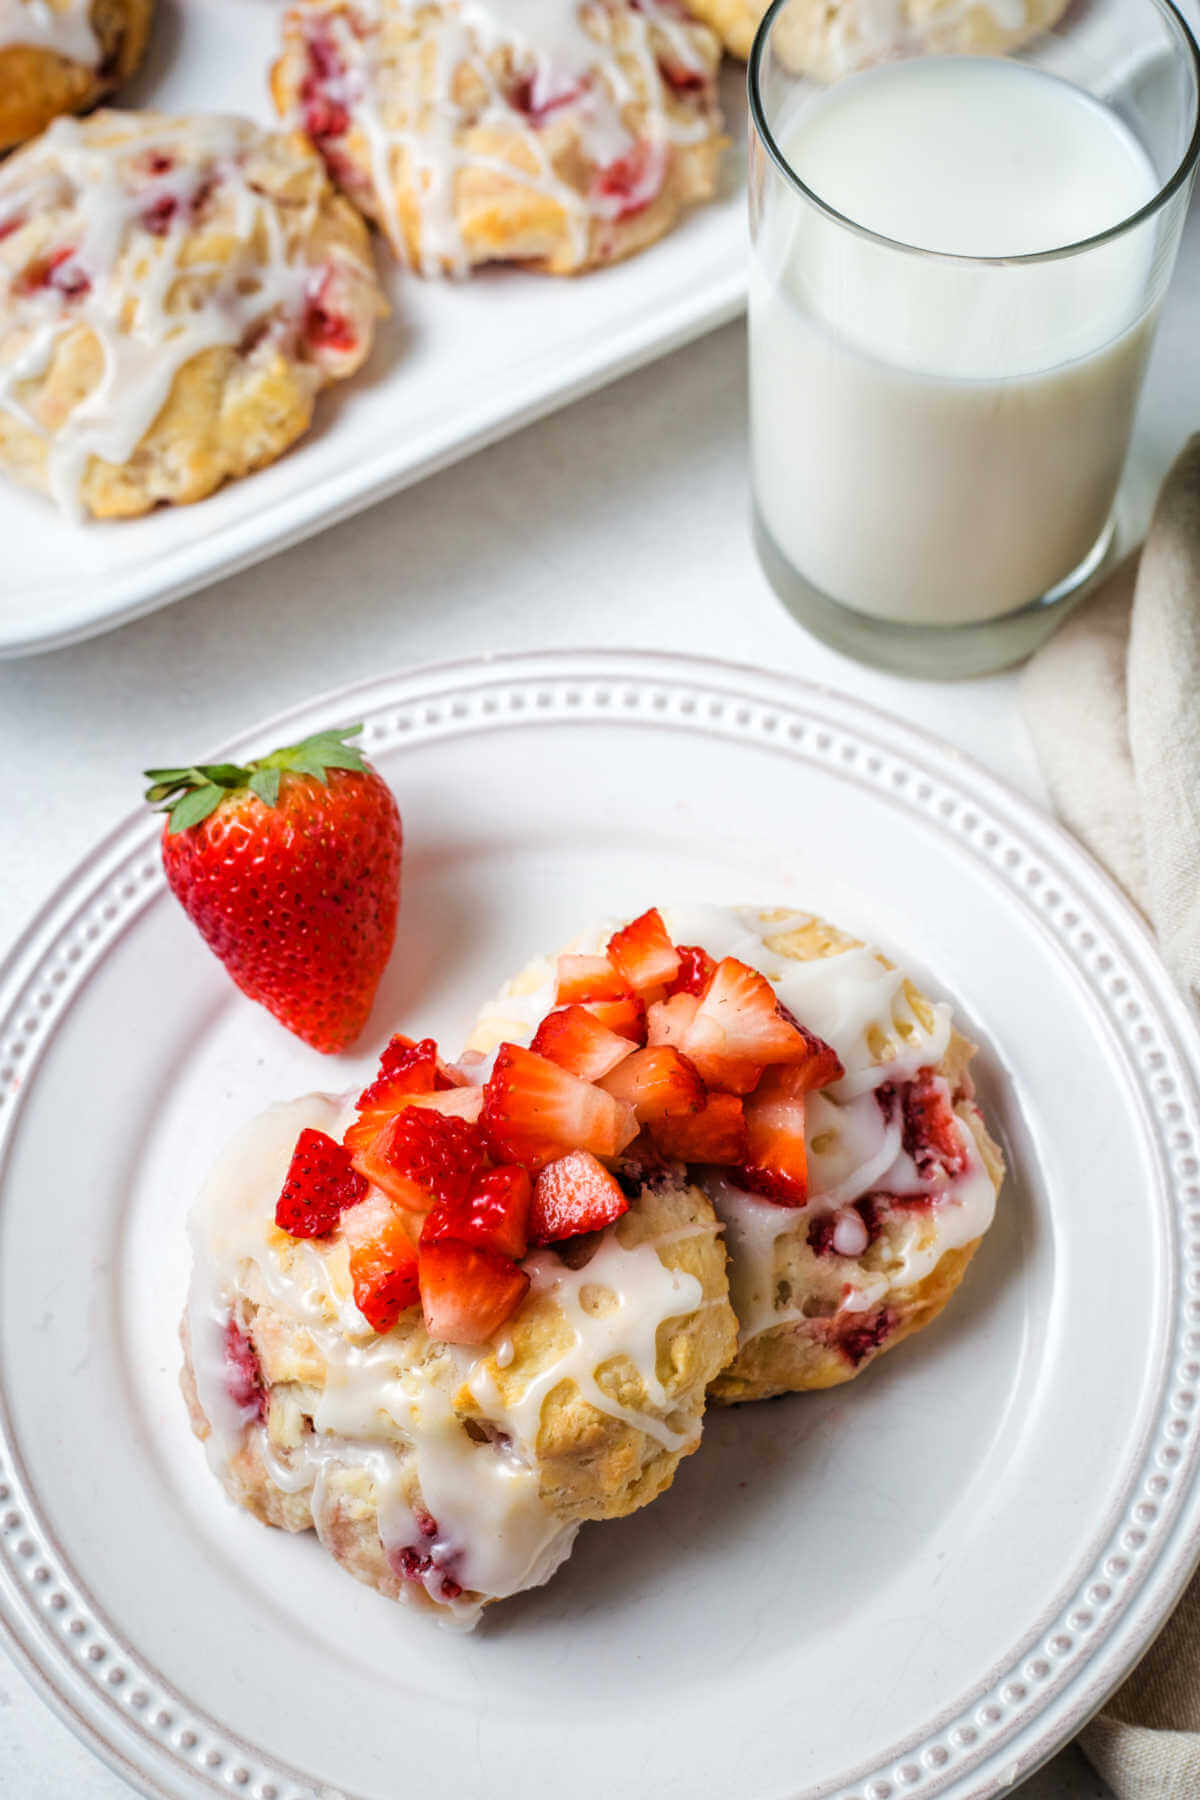 two strawberry biscuits on a white plate with more diced strawberries ladled on top and a glass of milk in the background.